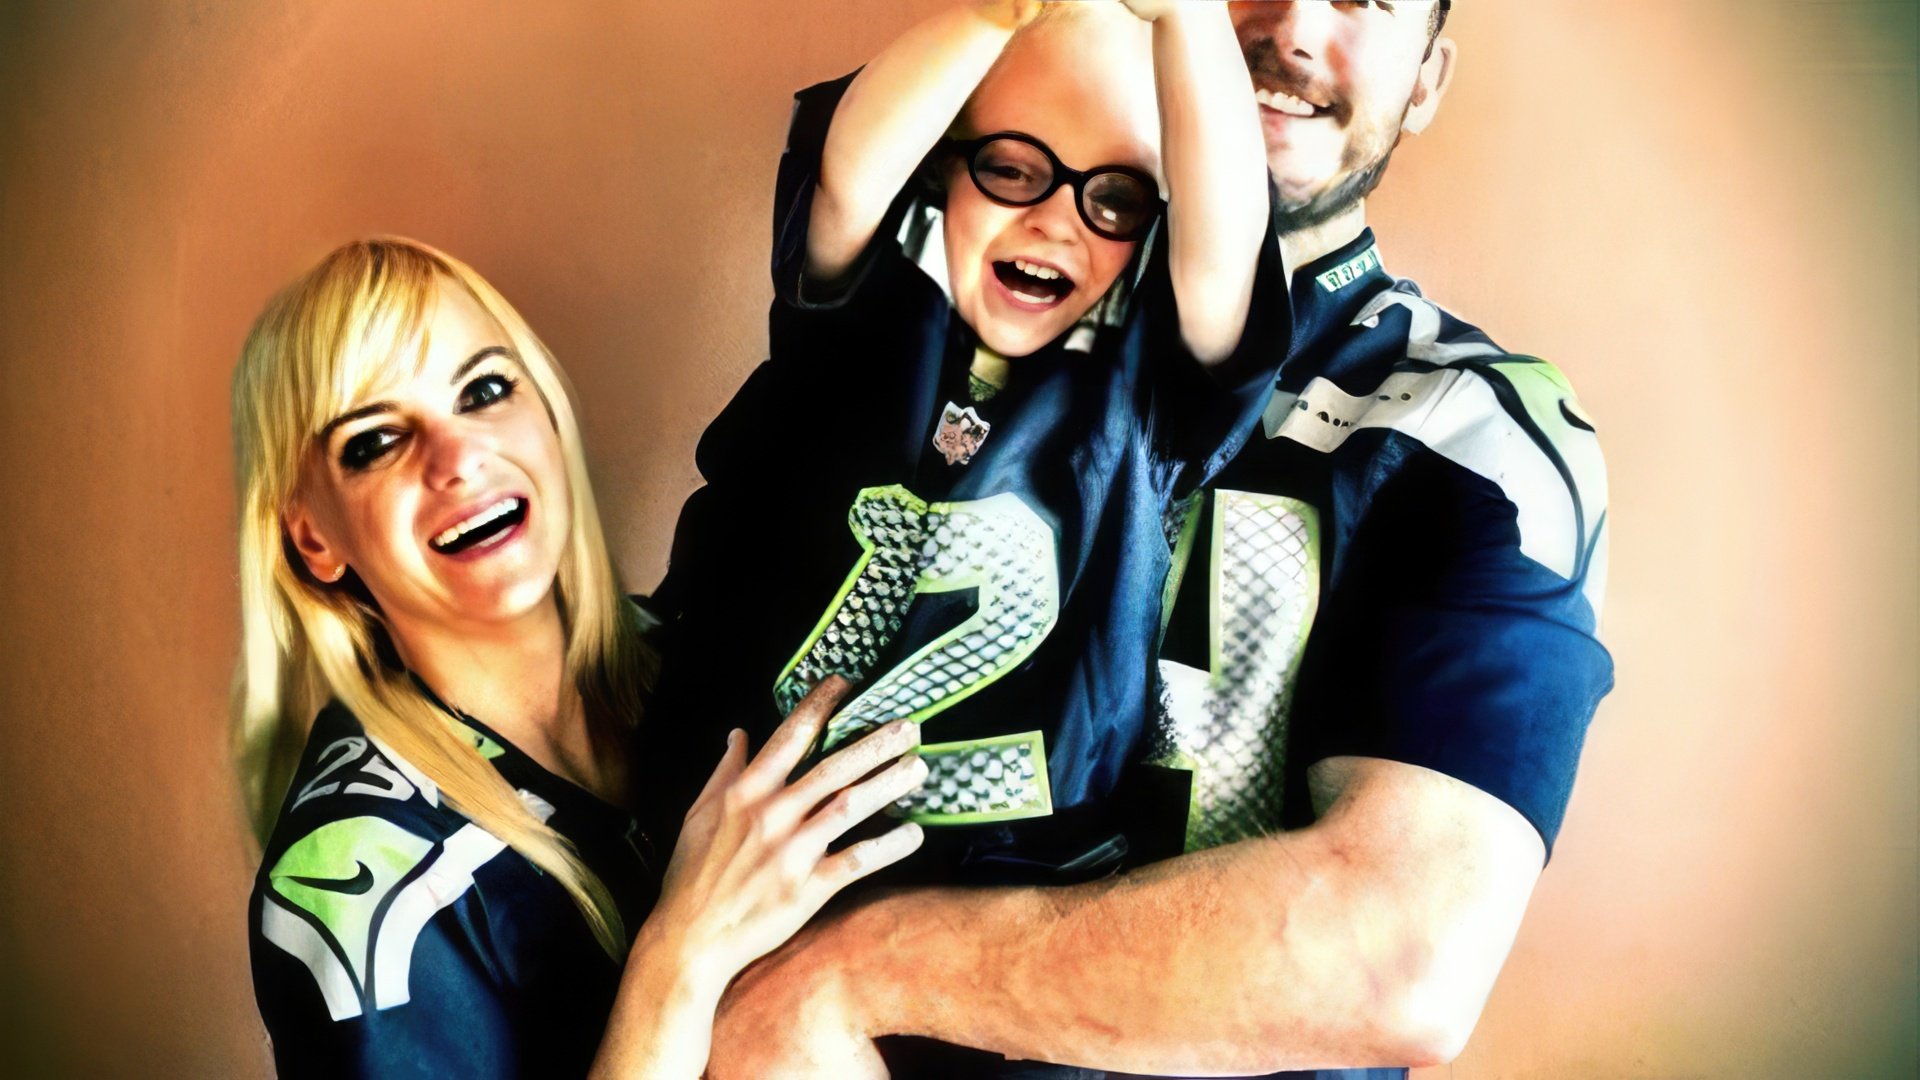 Chris Pratt with his wife and son is a happy family!